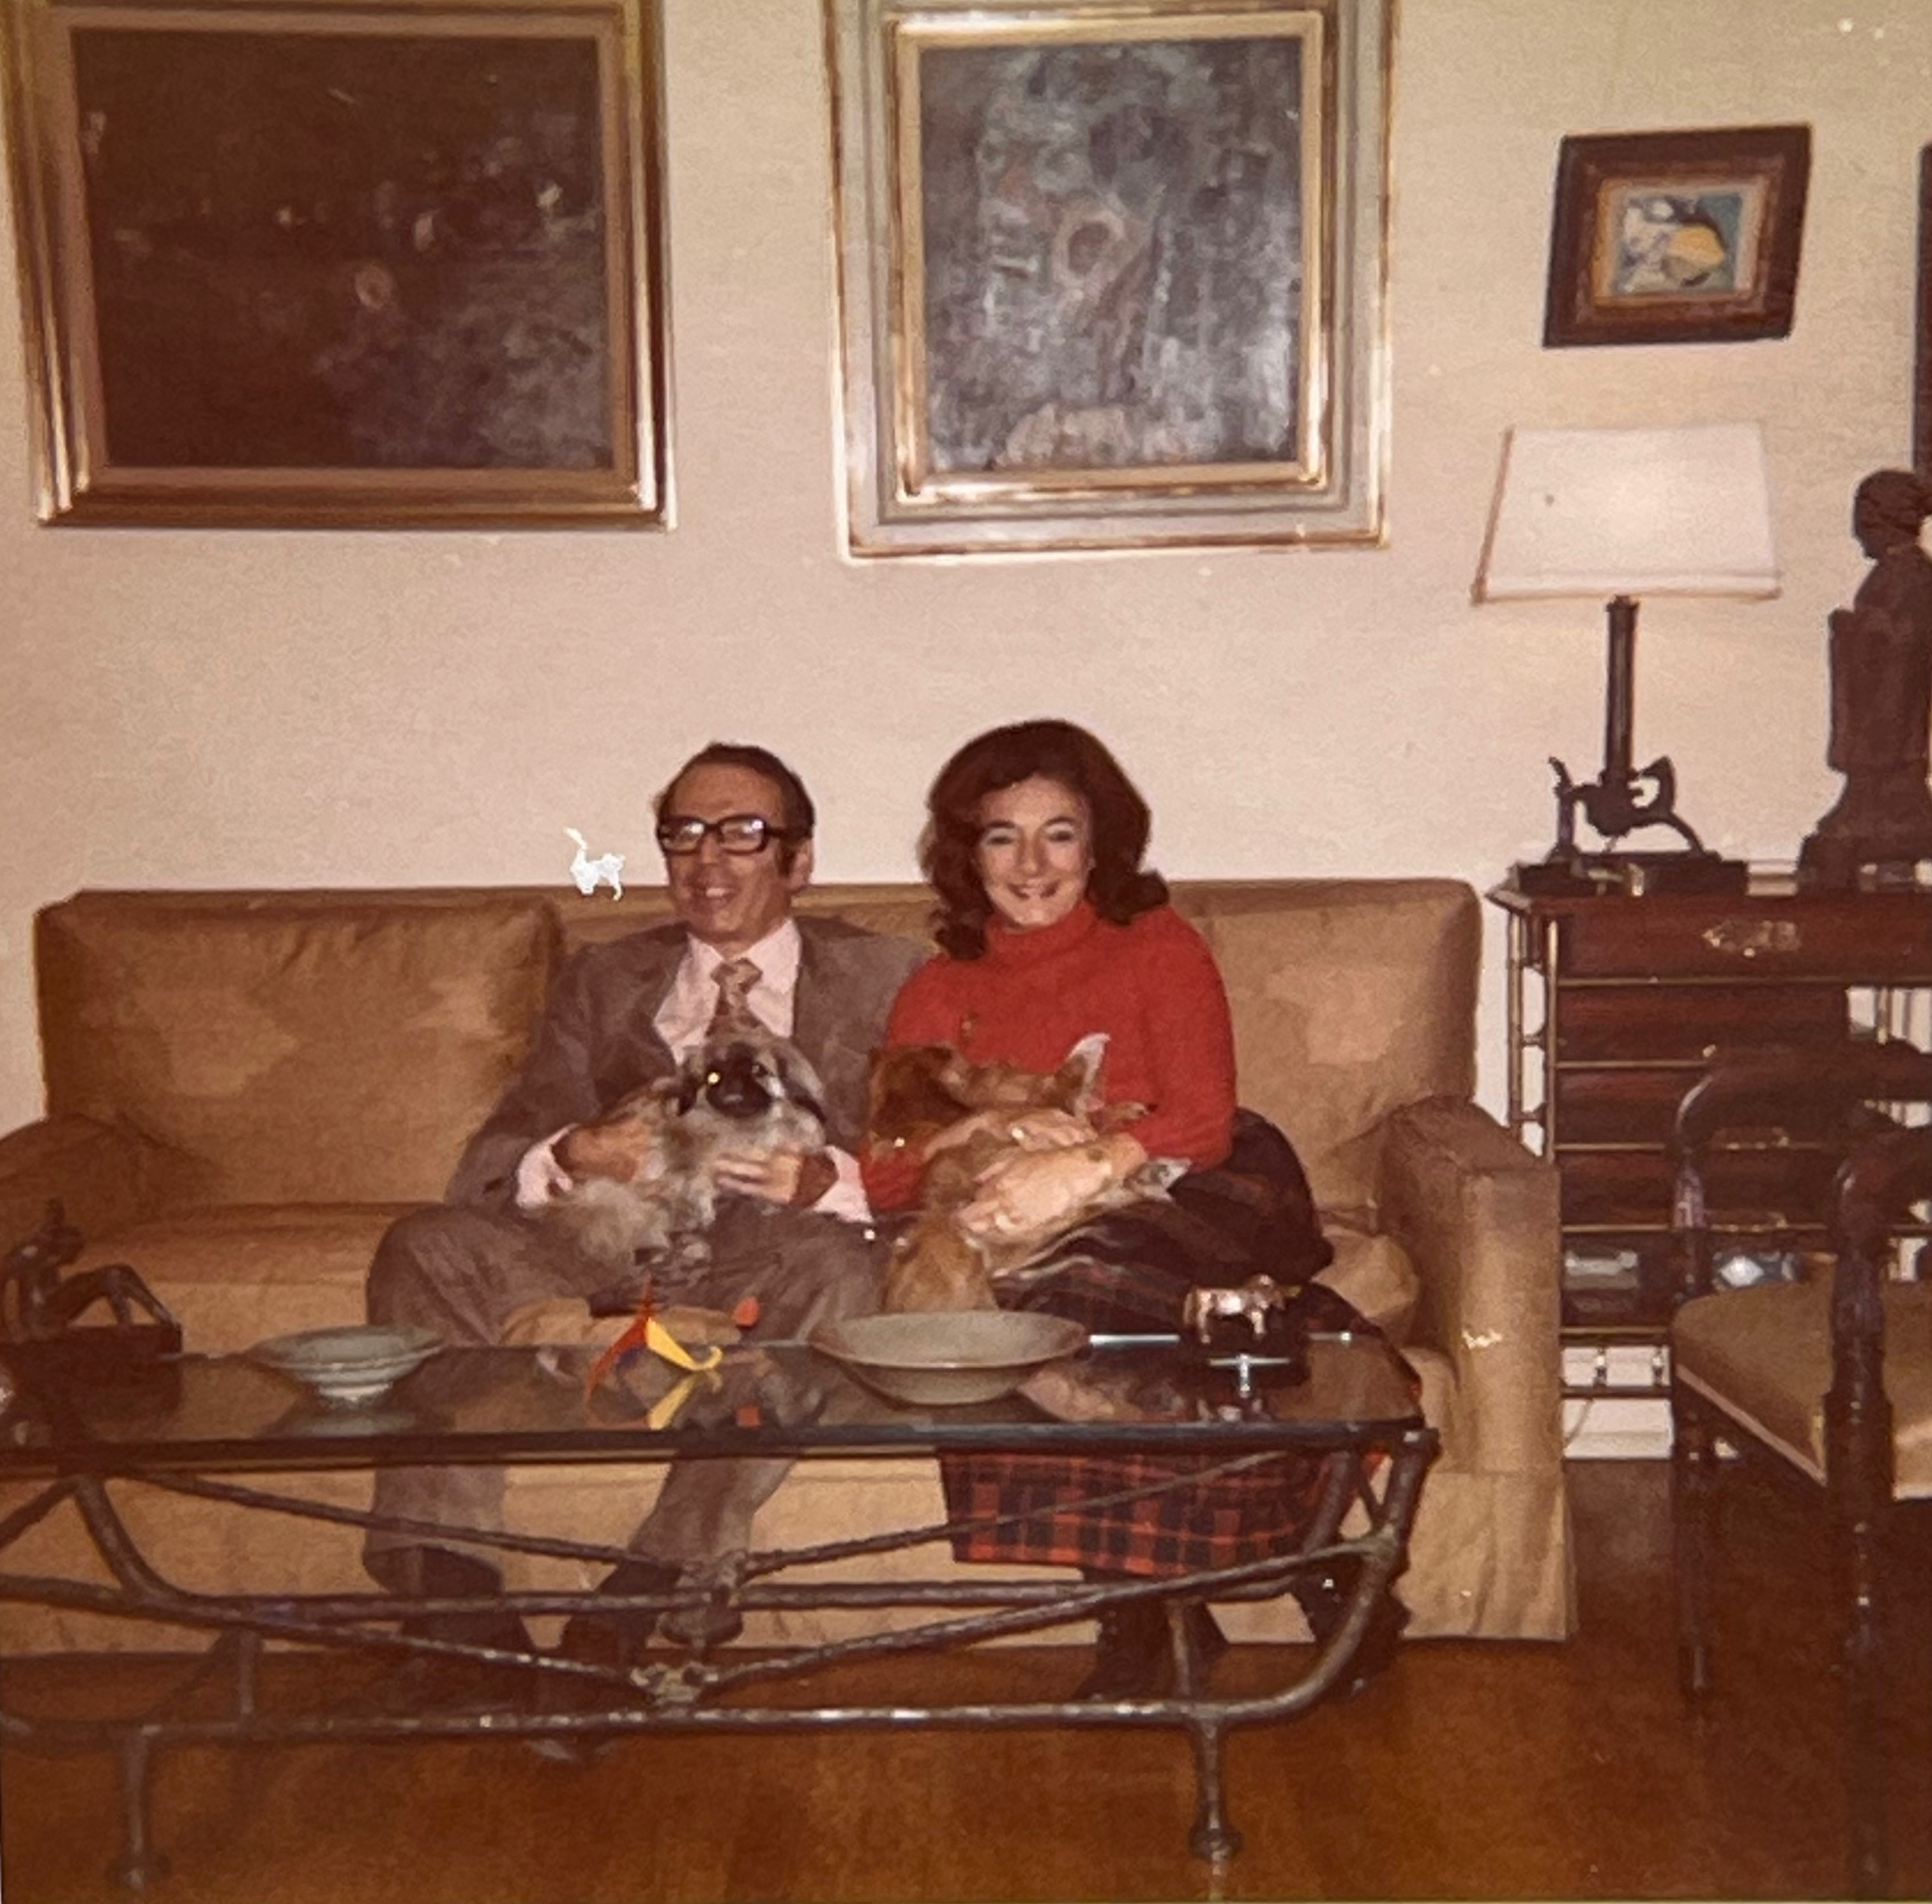 Bob and Rena holding their dogs, Fru Fru and Mimi while sitting in their London house. Notice the Alberto Giacometti table with a Henry Moore and Alexander Calder sculpture.